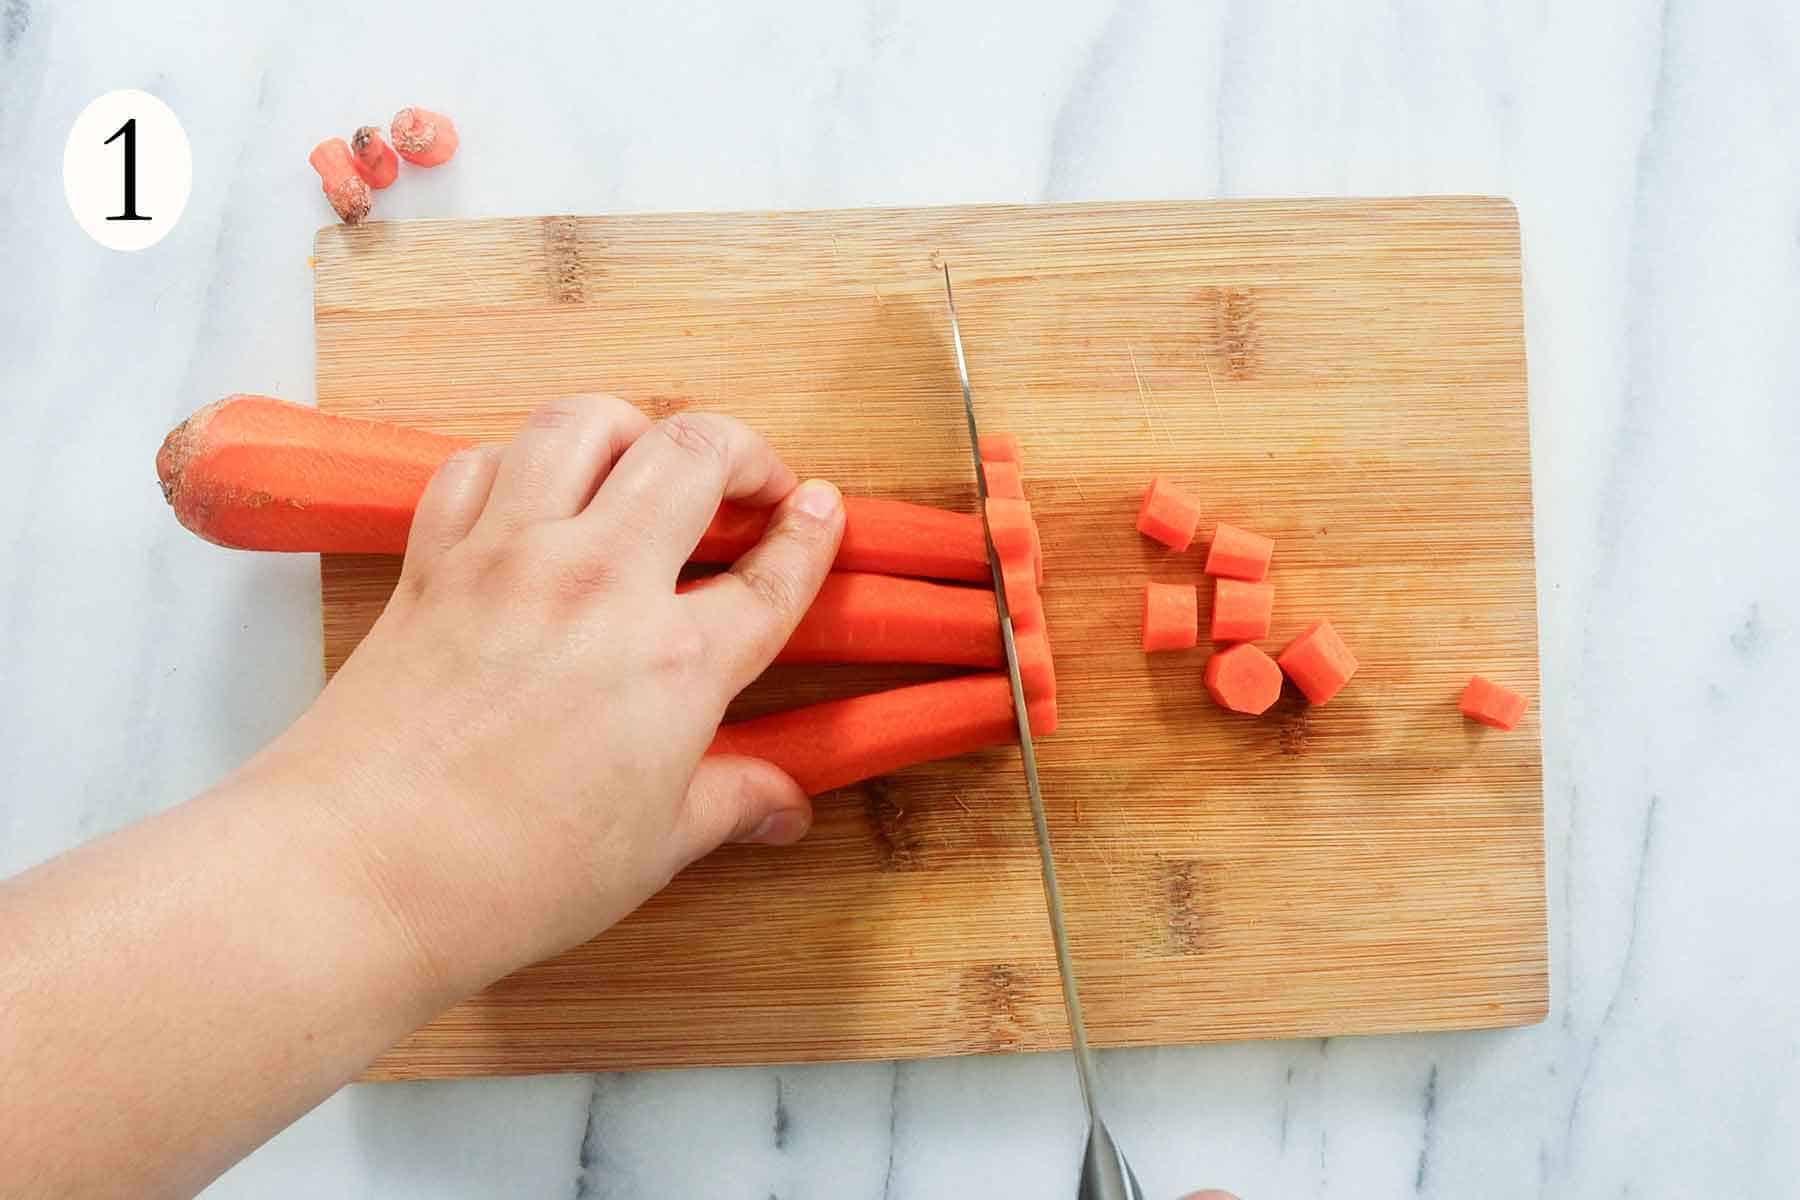 3 carrots being cut into small cylinders on a wood cutting board.